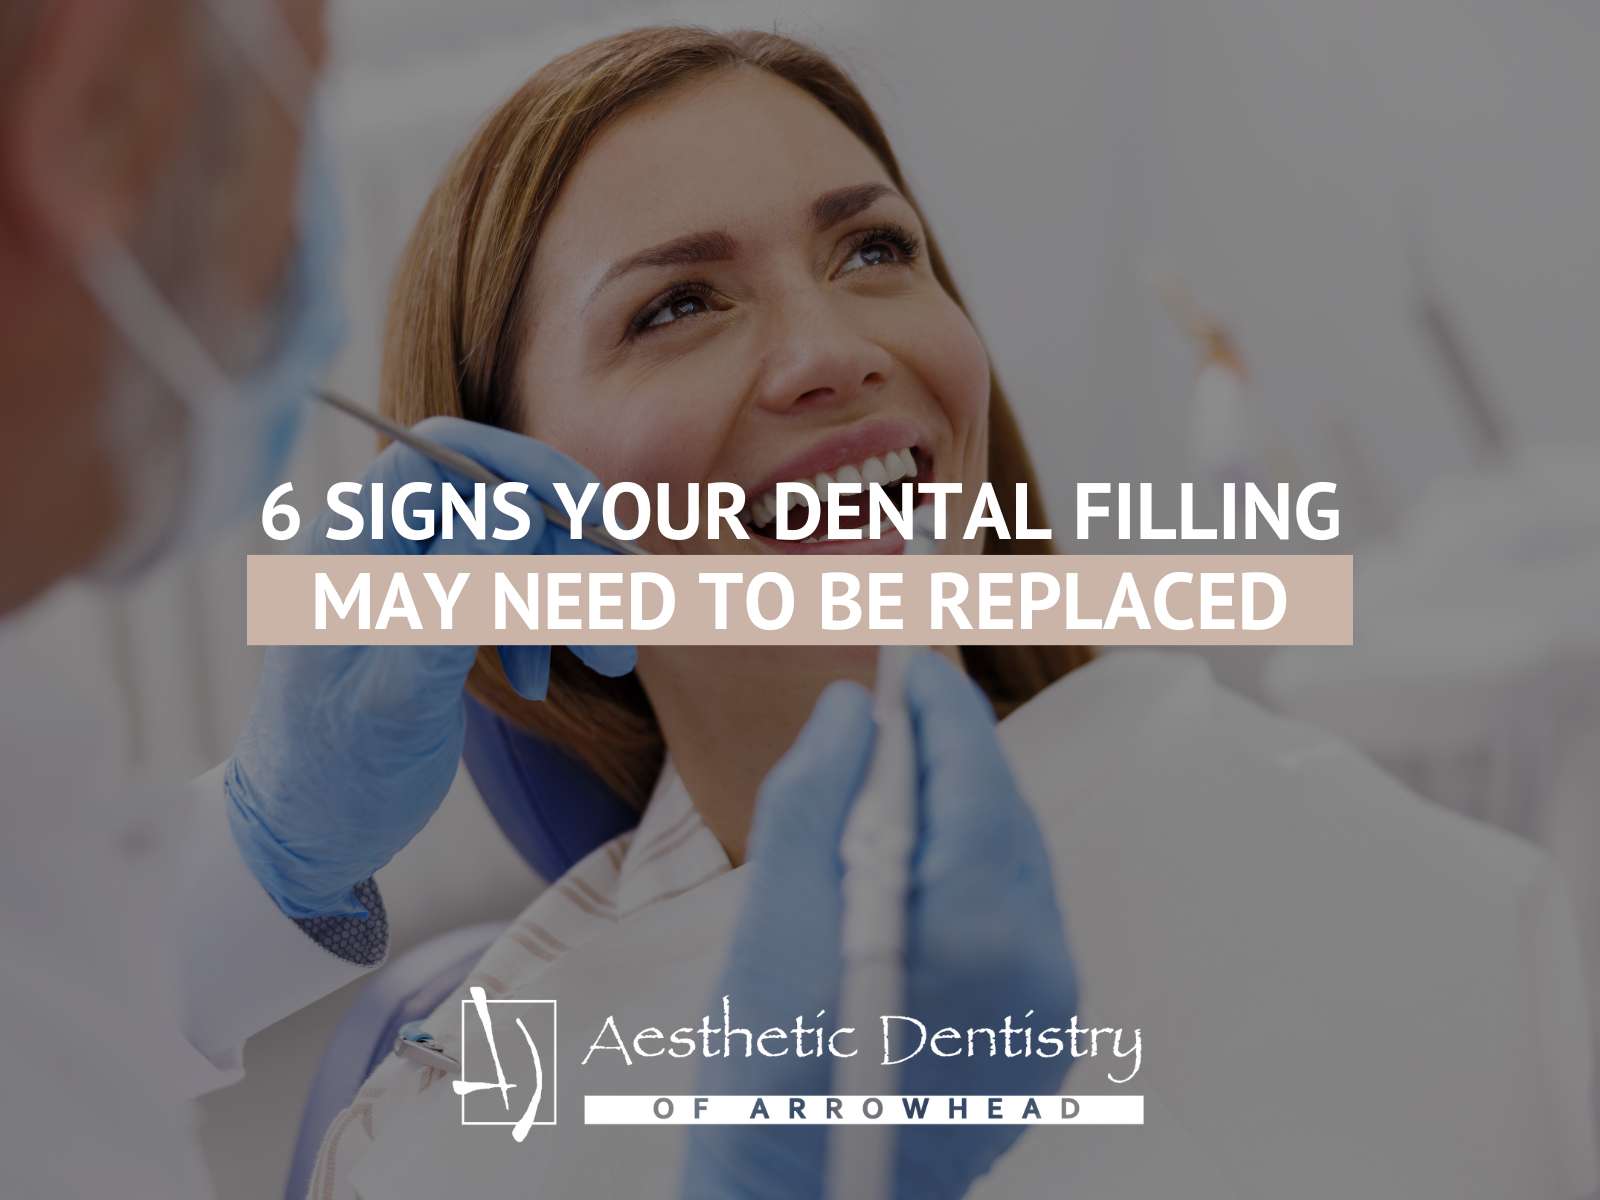 6 Signs Your Dental Filling May Need To Be Replaced